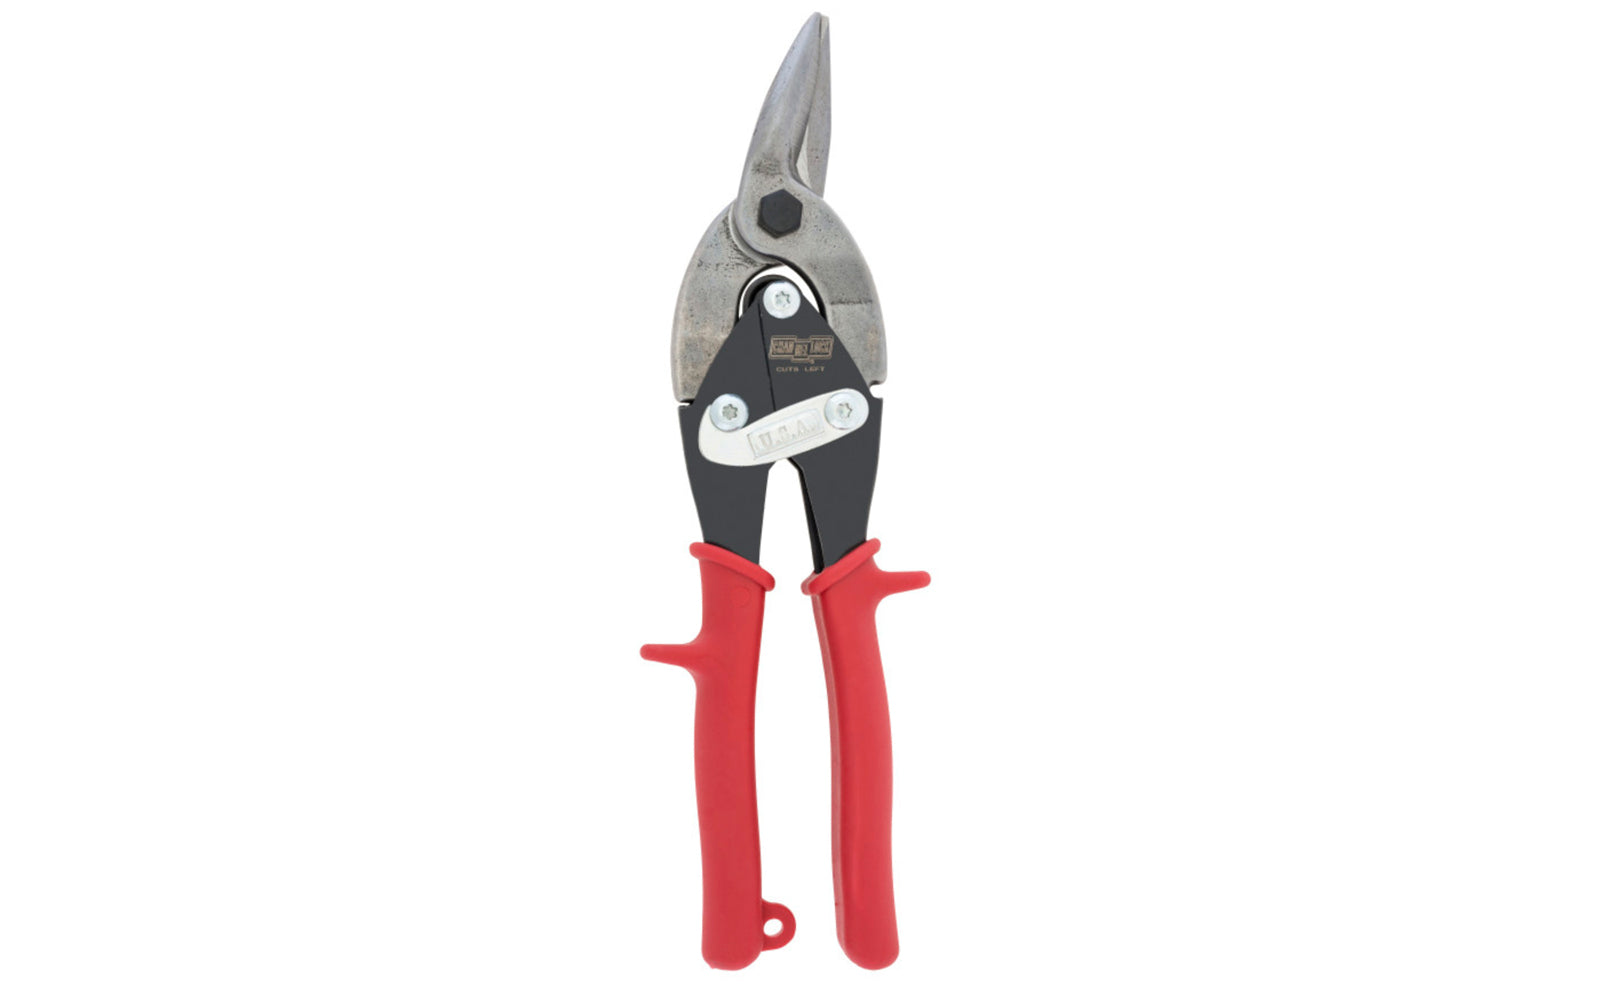 These 10" Channellock Aviation Snips - Left are great for cutting straight & left curves. The blades are forged from molybdenum alloy steel for durability & strength. Channelock Model 610AL.  Made in USA.